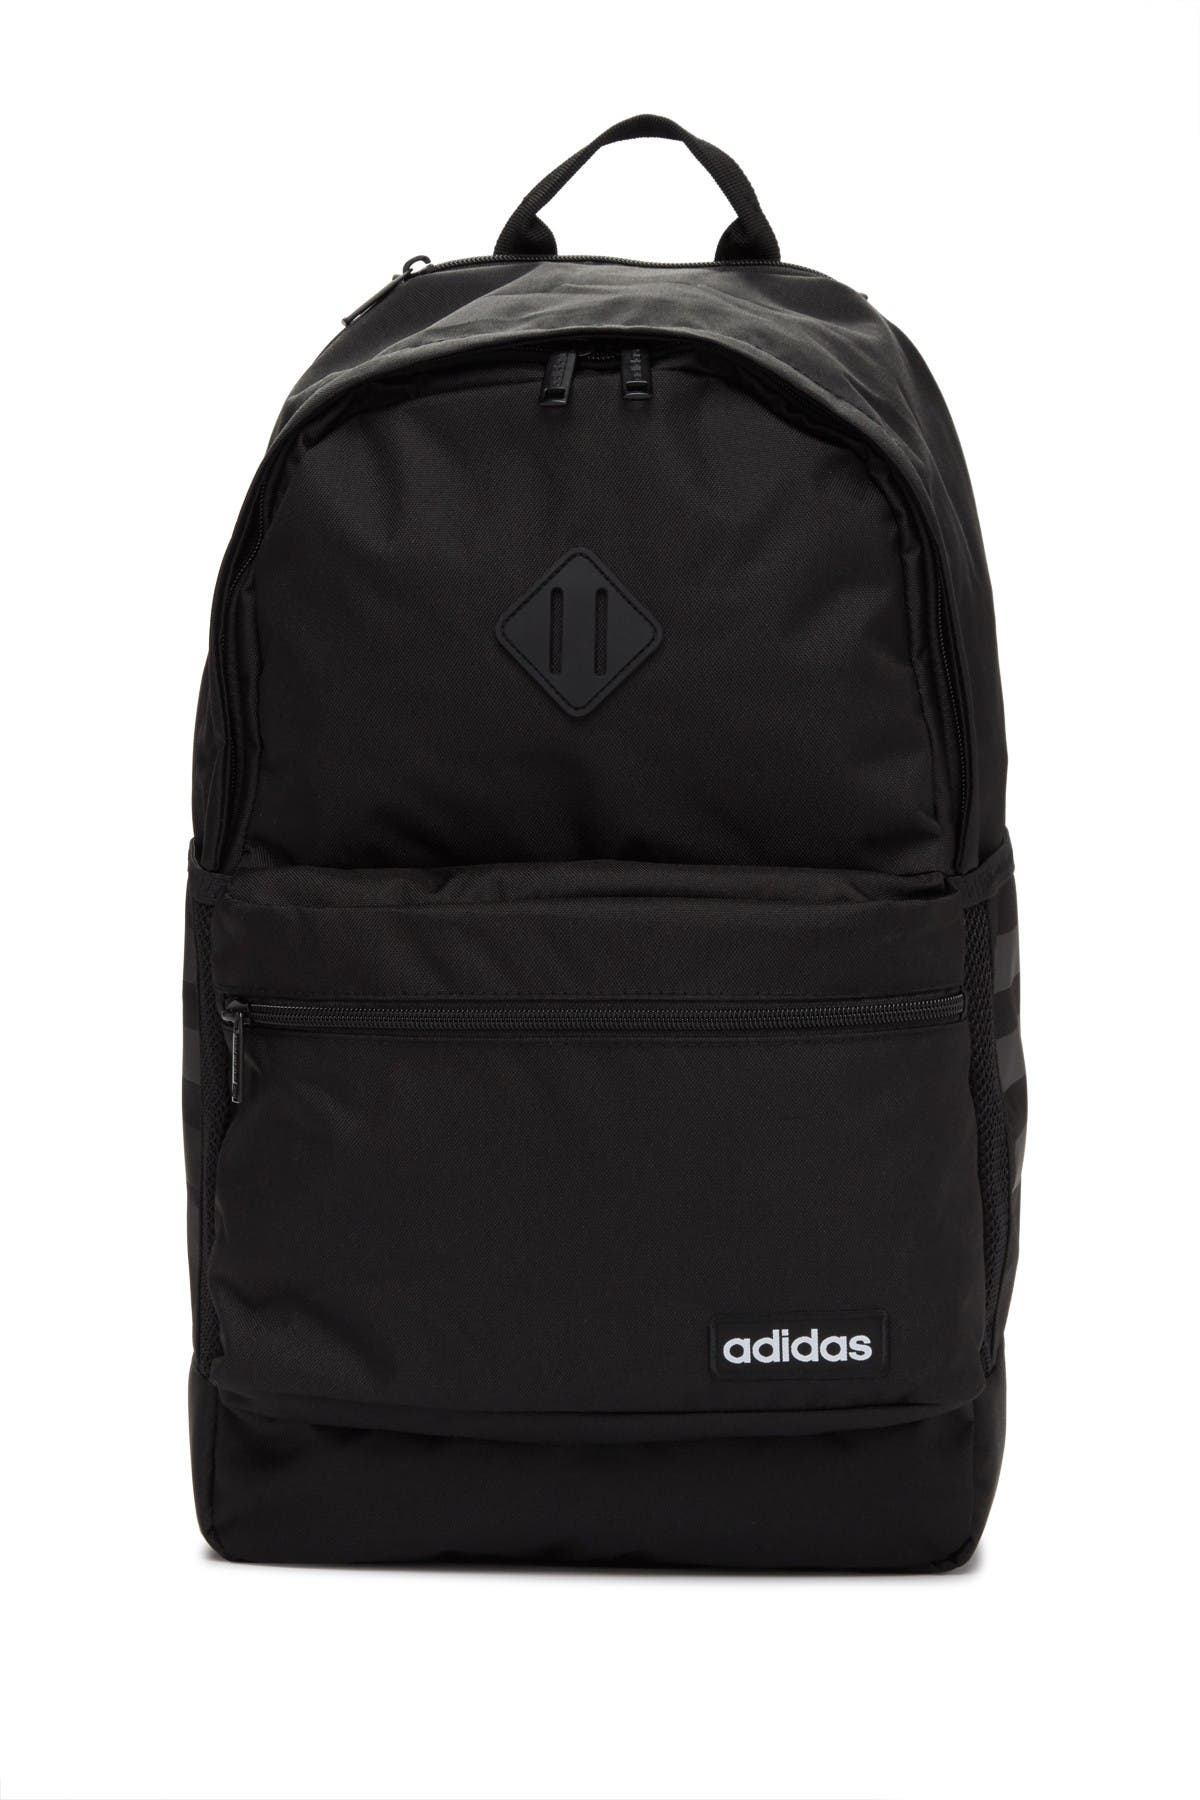 adidas classic 3s ii backpack review